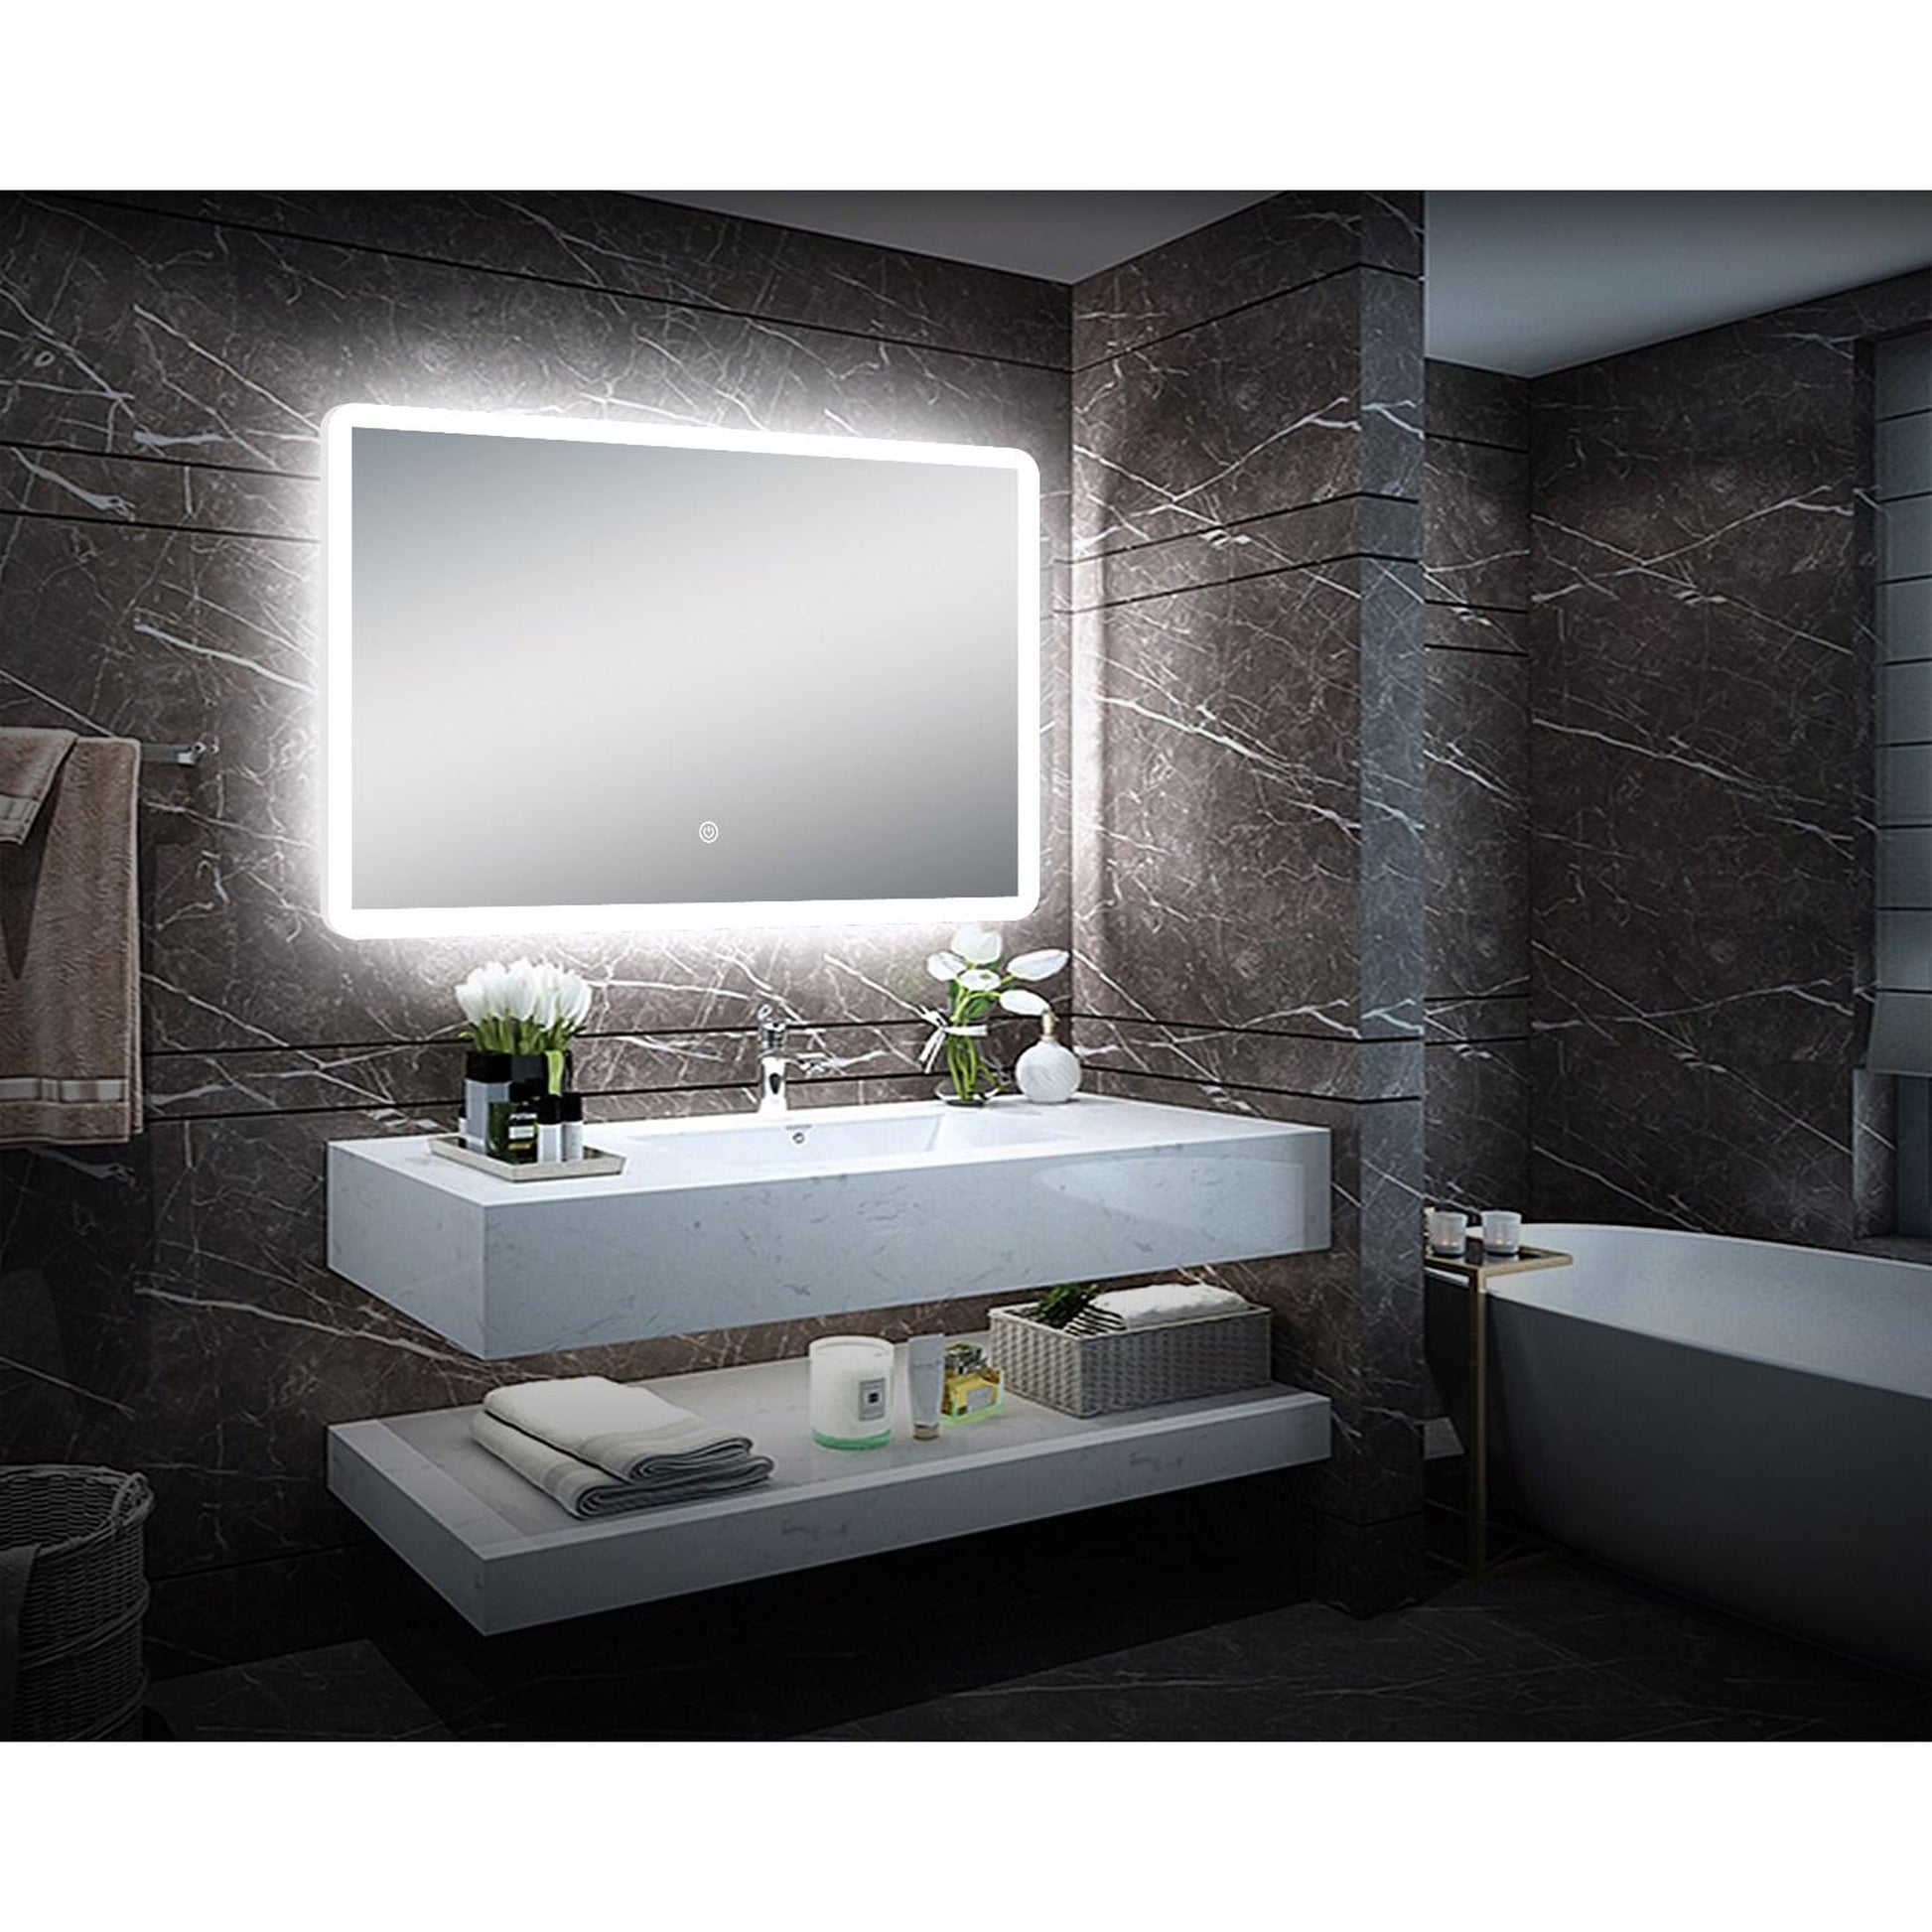 DreamWerks Pilsen 32" W x 24" H LED Mirror with Dimmer and Defogger